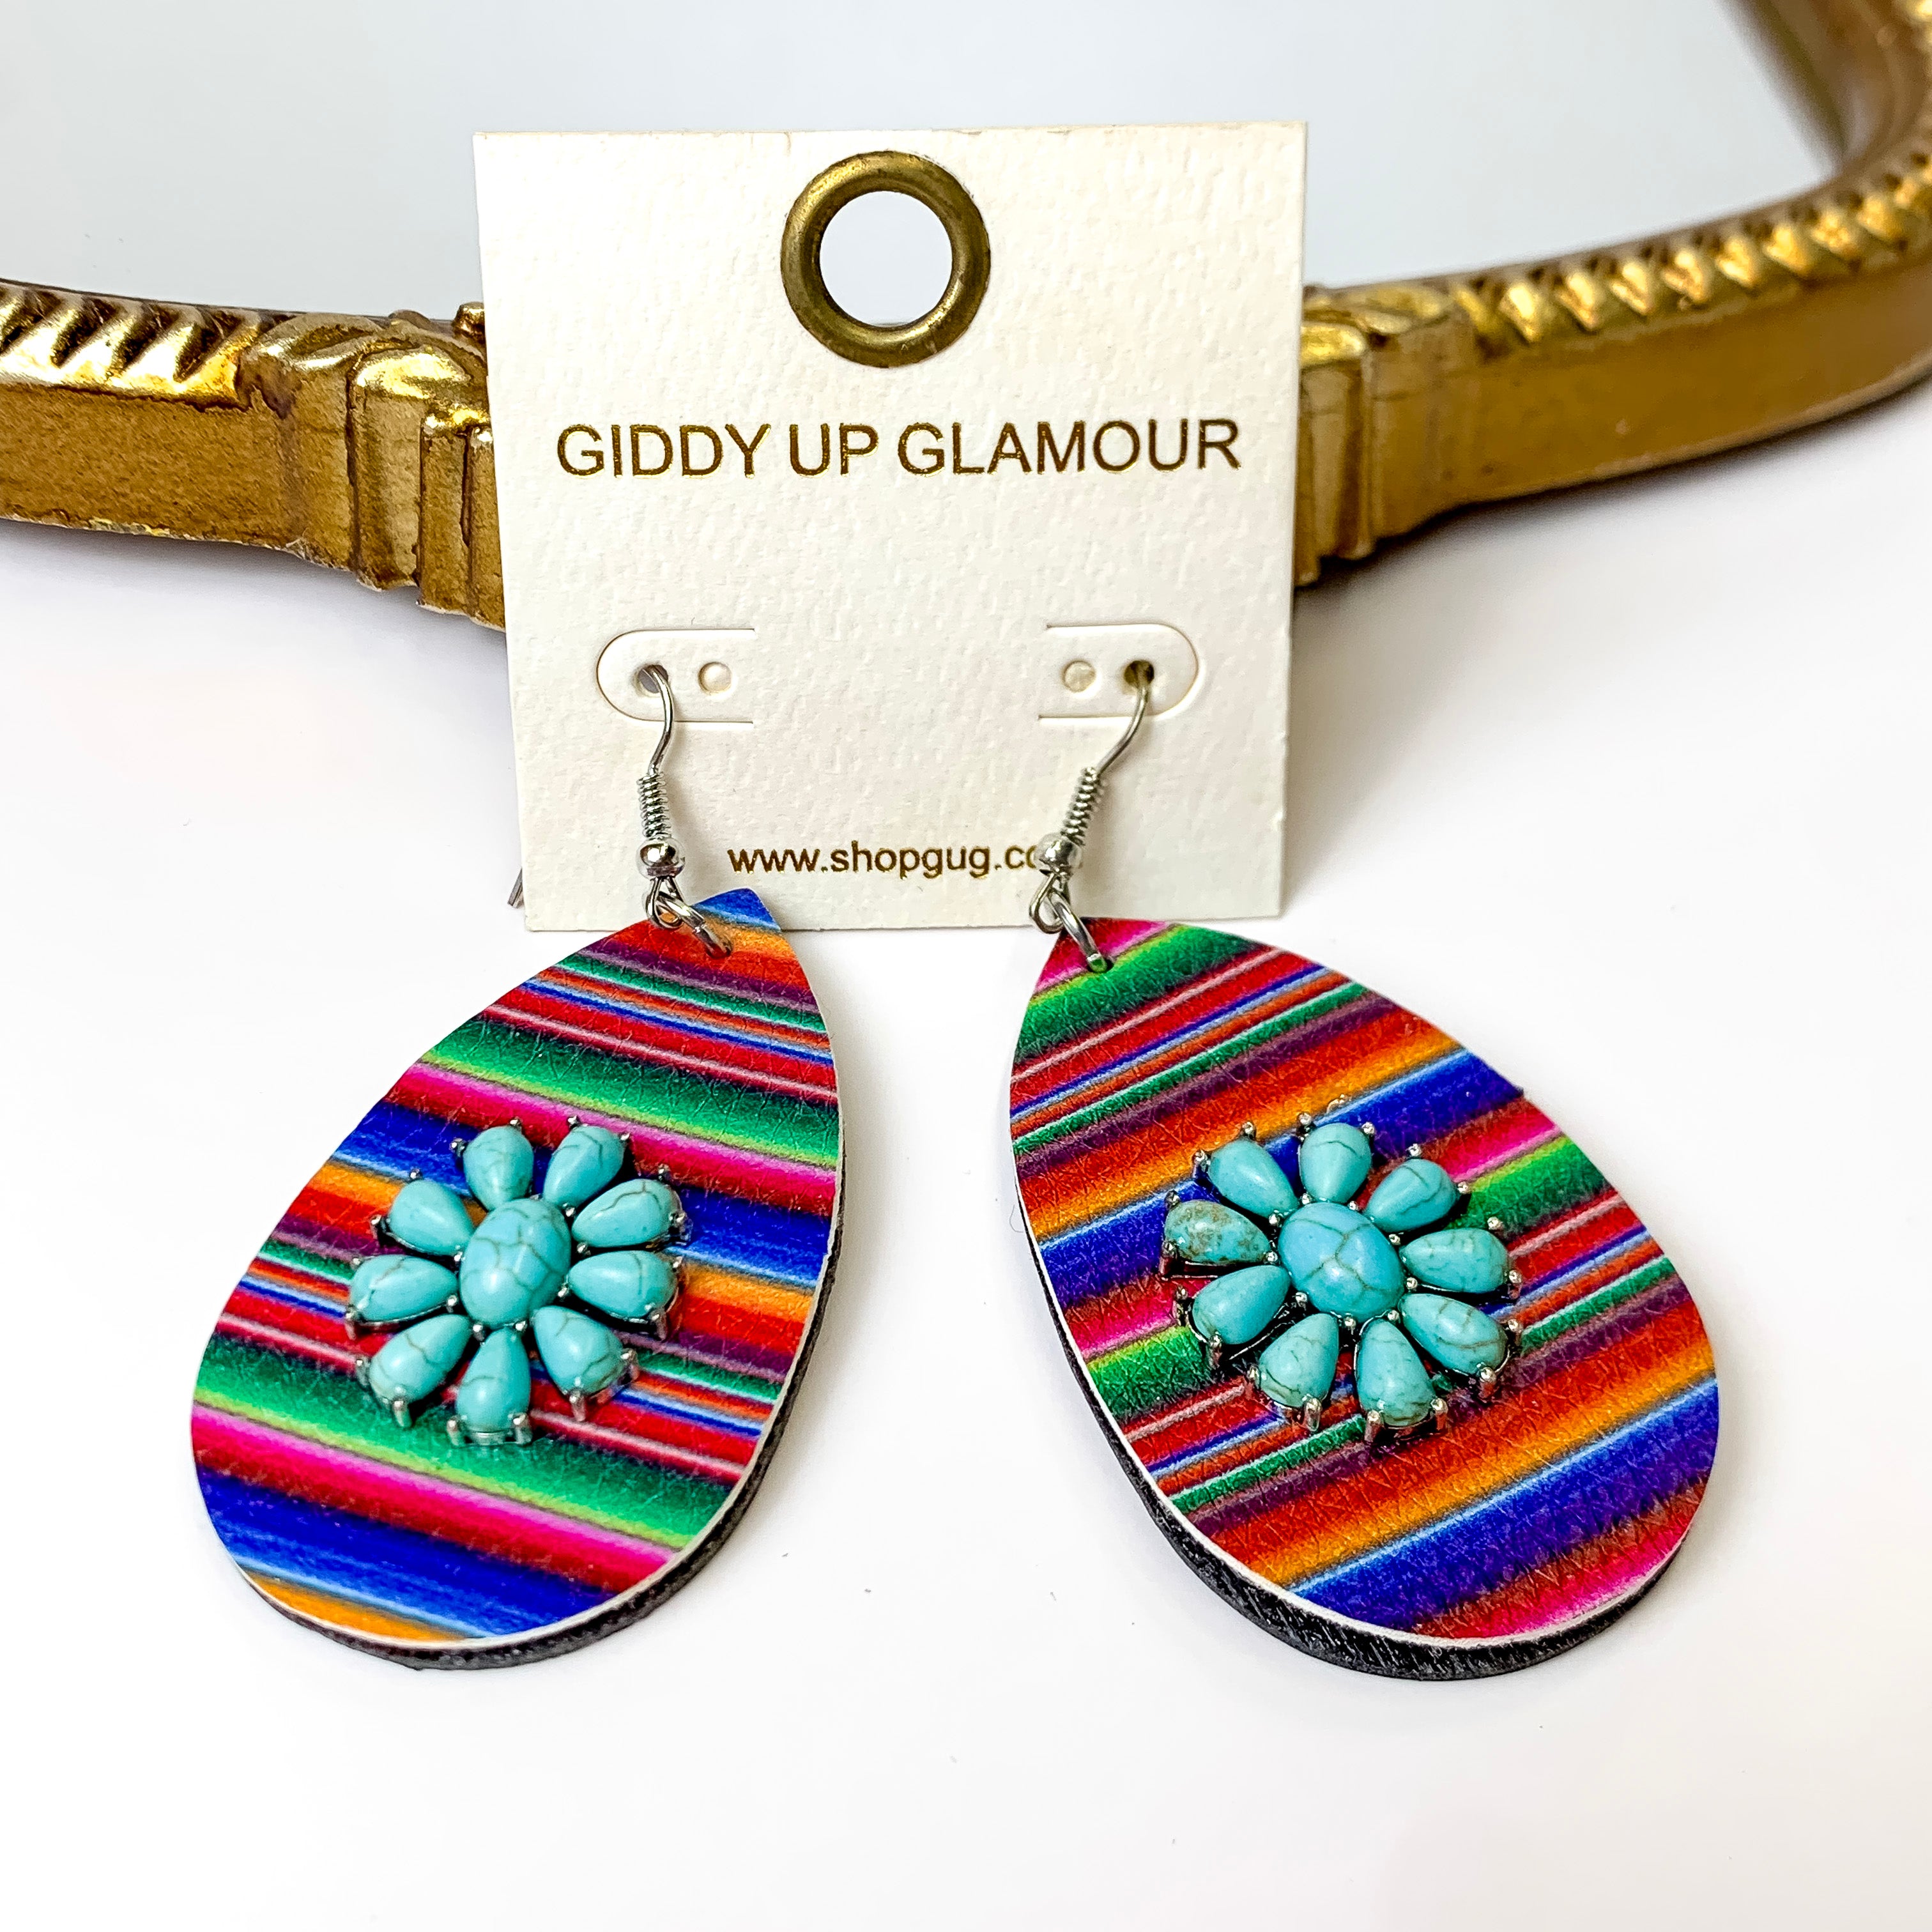 Faux Leather Serape Print Teardrop Earrings With Faux Turquoise Stone Flower - Giddy Up Glamour Boutique